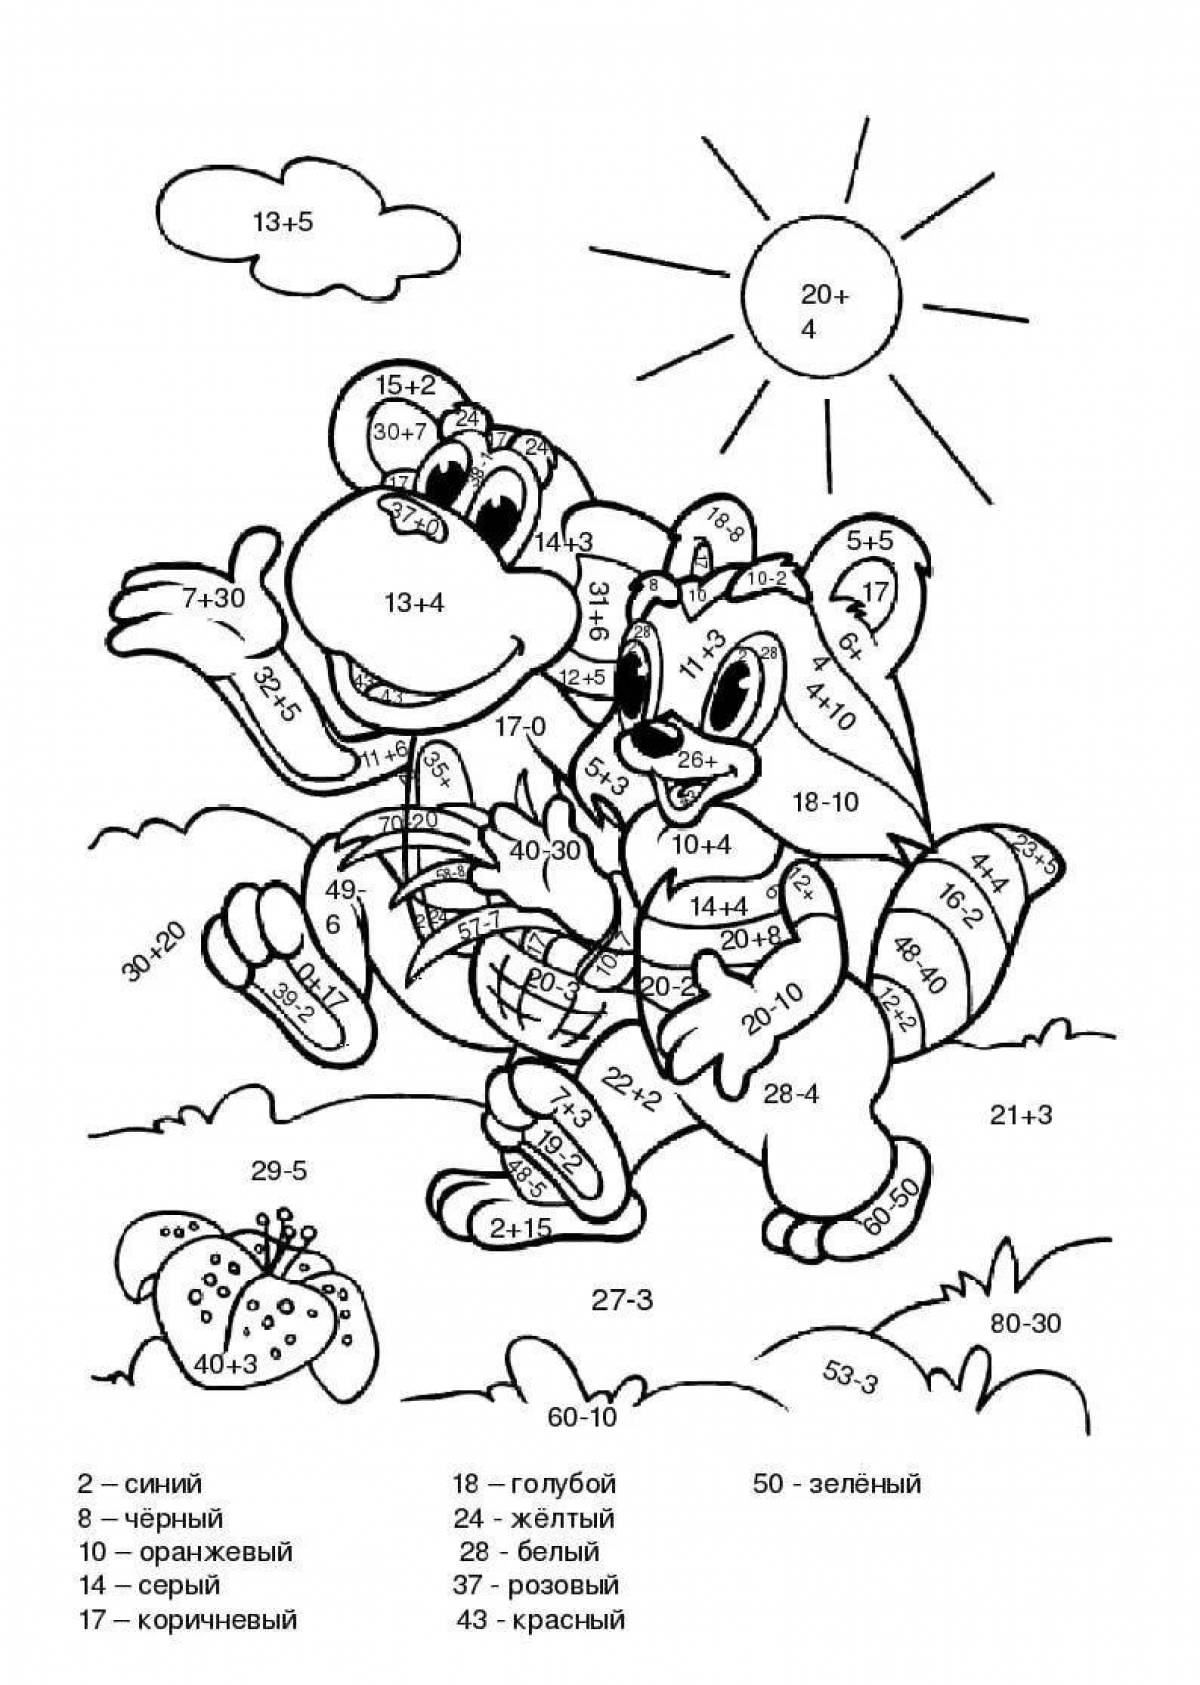 Fun math coloring book addition for 2nd grade for 20 years